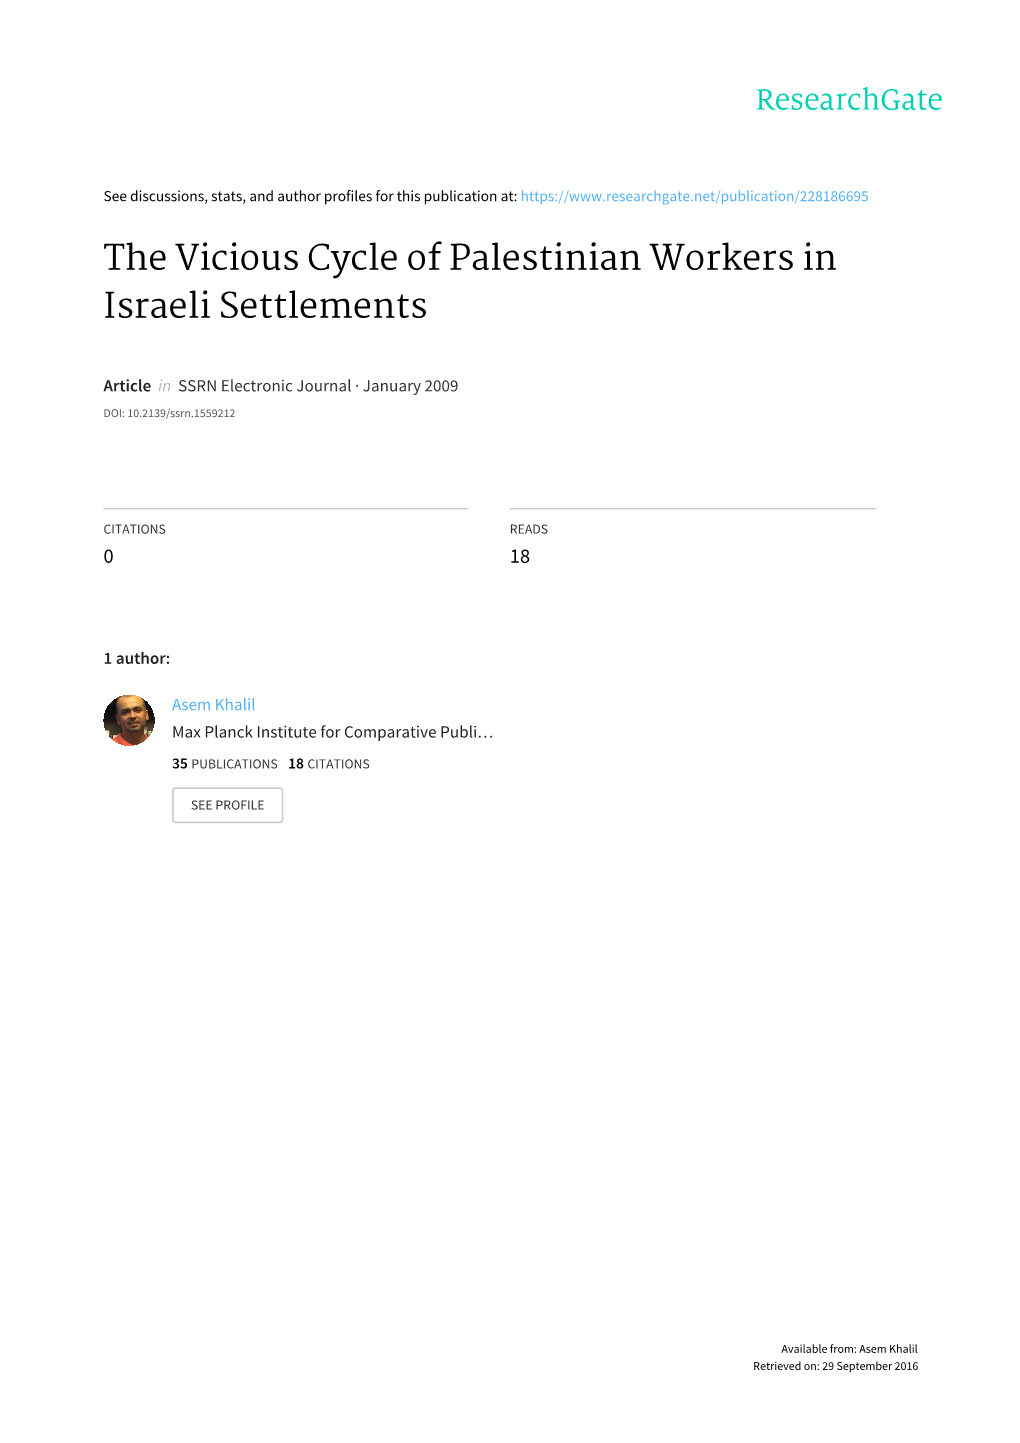 The Vicious Cycle of Palestinian Workers in Israeli Settlements